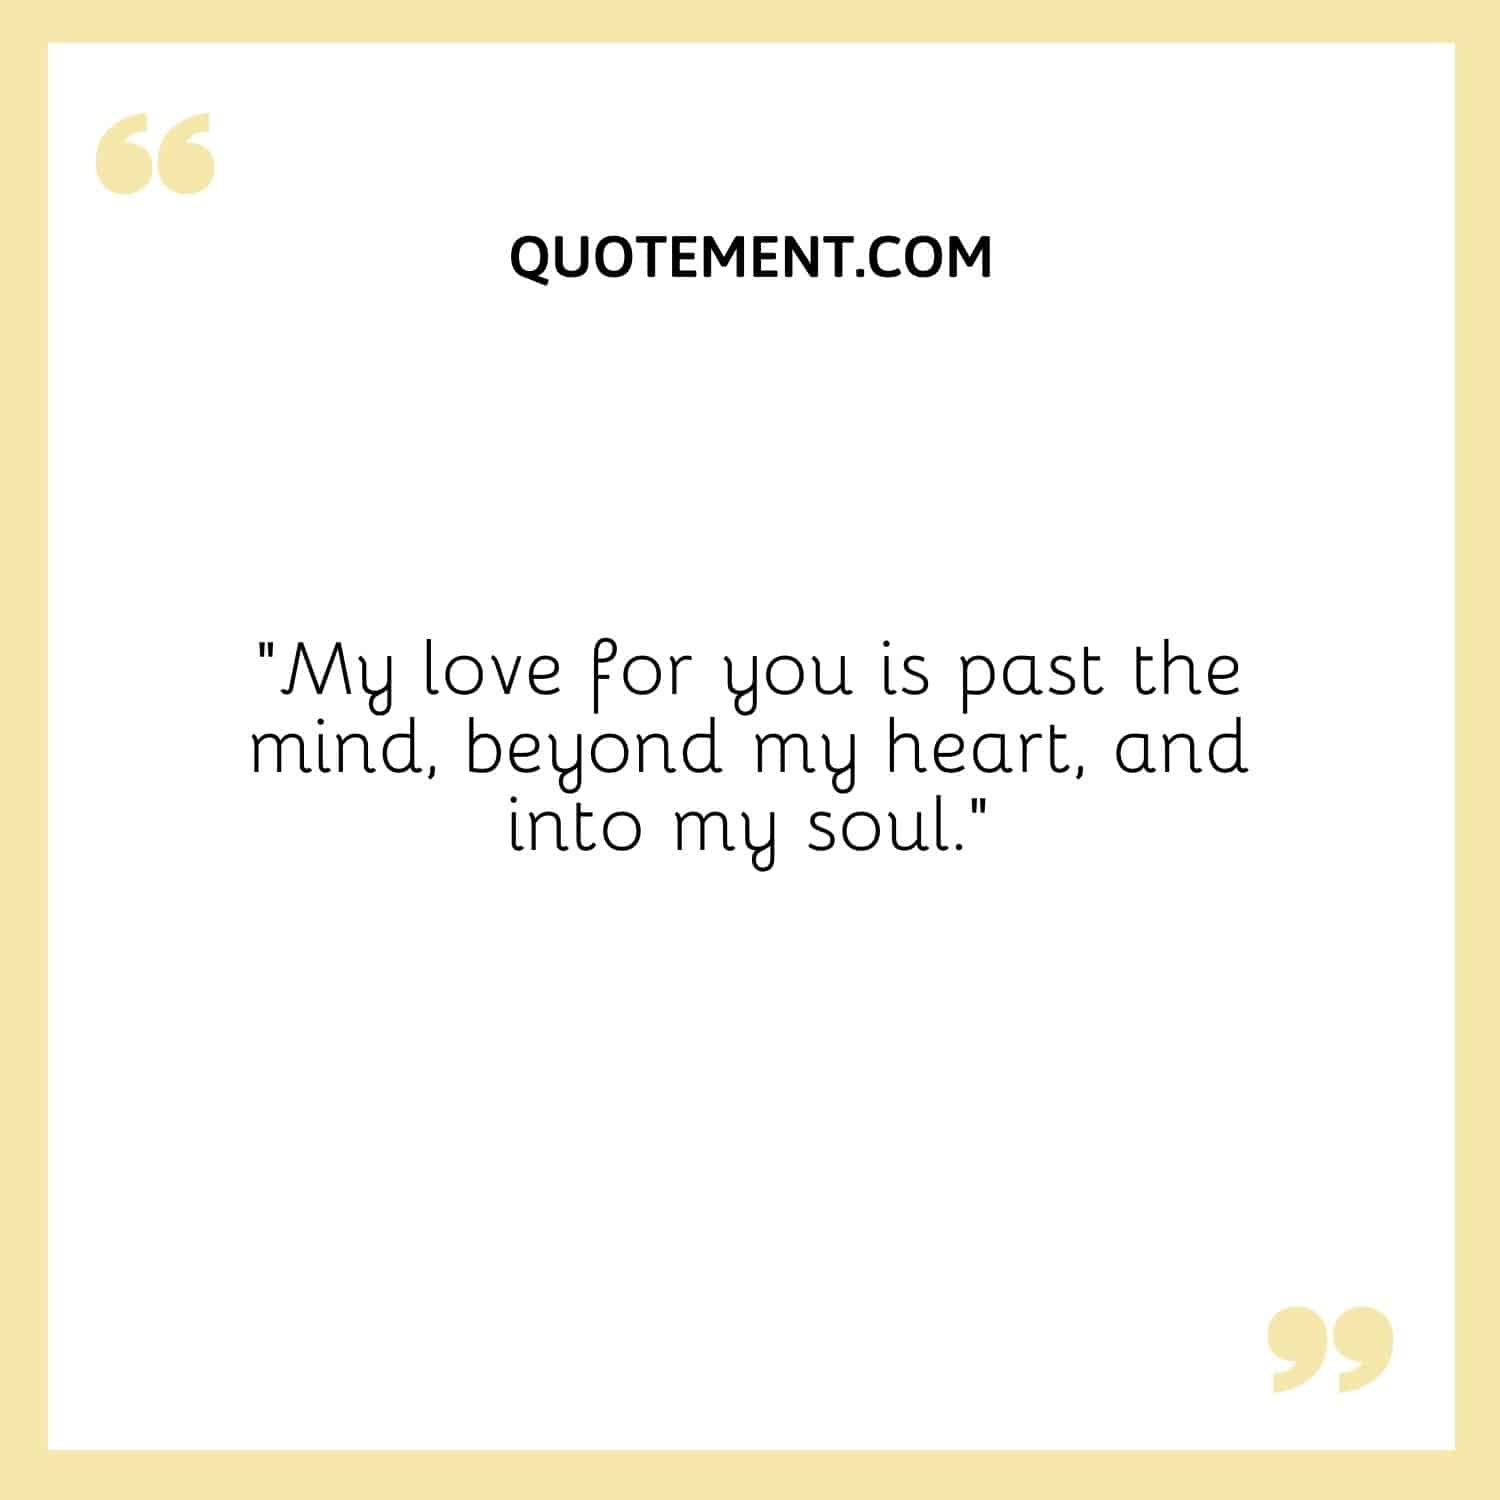 My love for you is past the mind